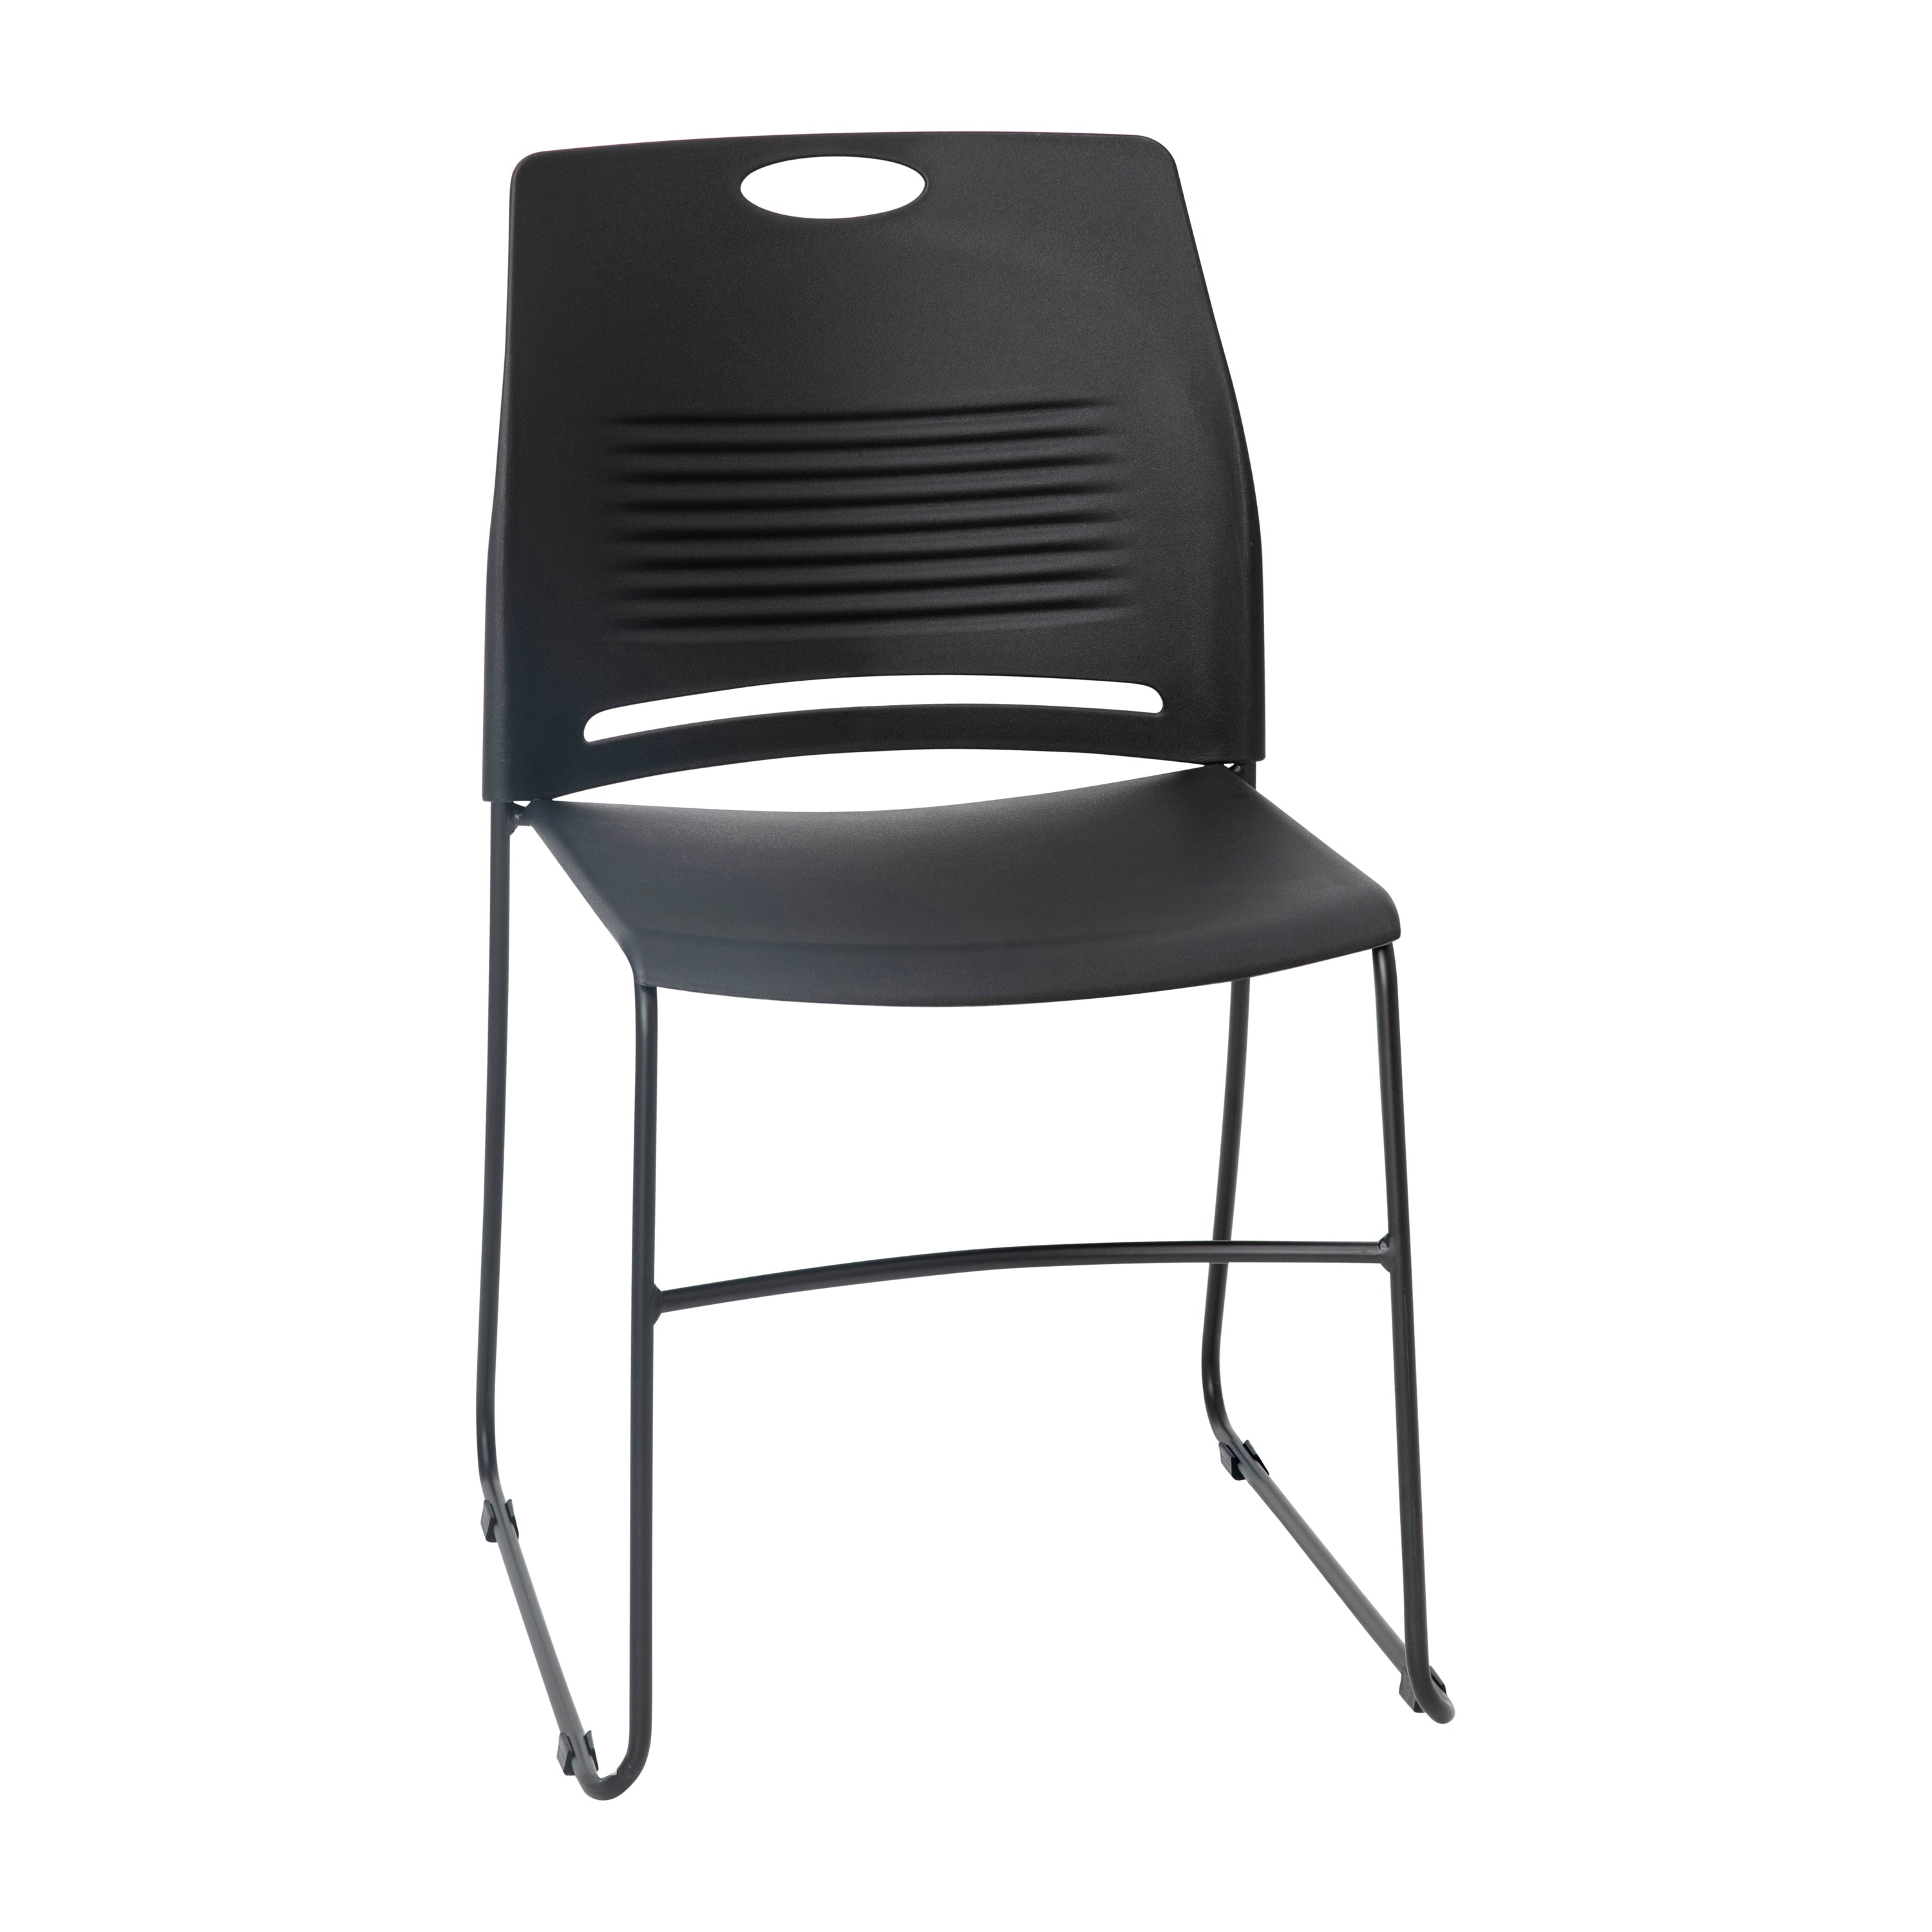 HERCULES Series Commercial Grade 660 lb. Capacity Plastic Stack Chair with Powder Coated Sled Base Frame and Integrated Carrying Handle-Plastic Stack Chair-Flash Furniture-Wall2Wall Furnishings